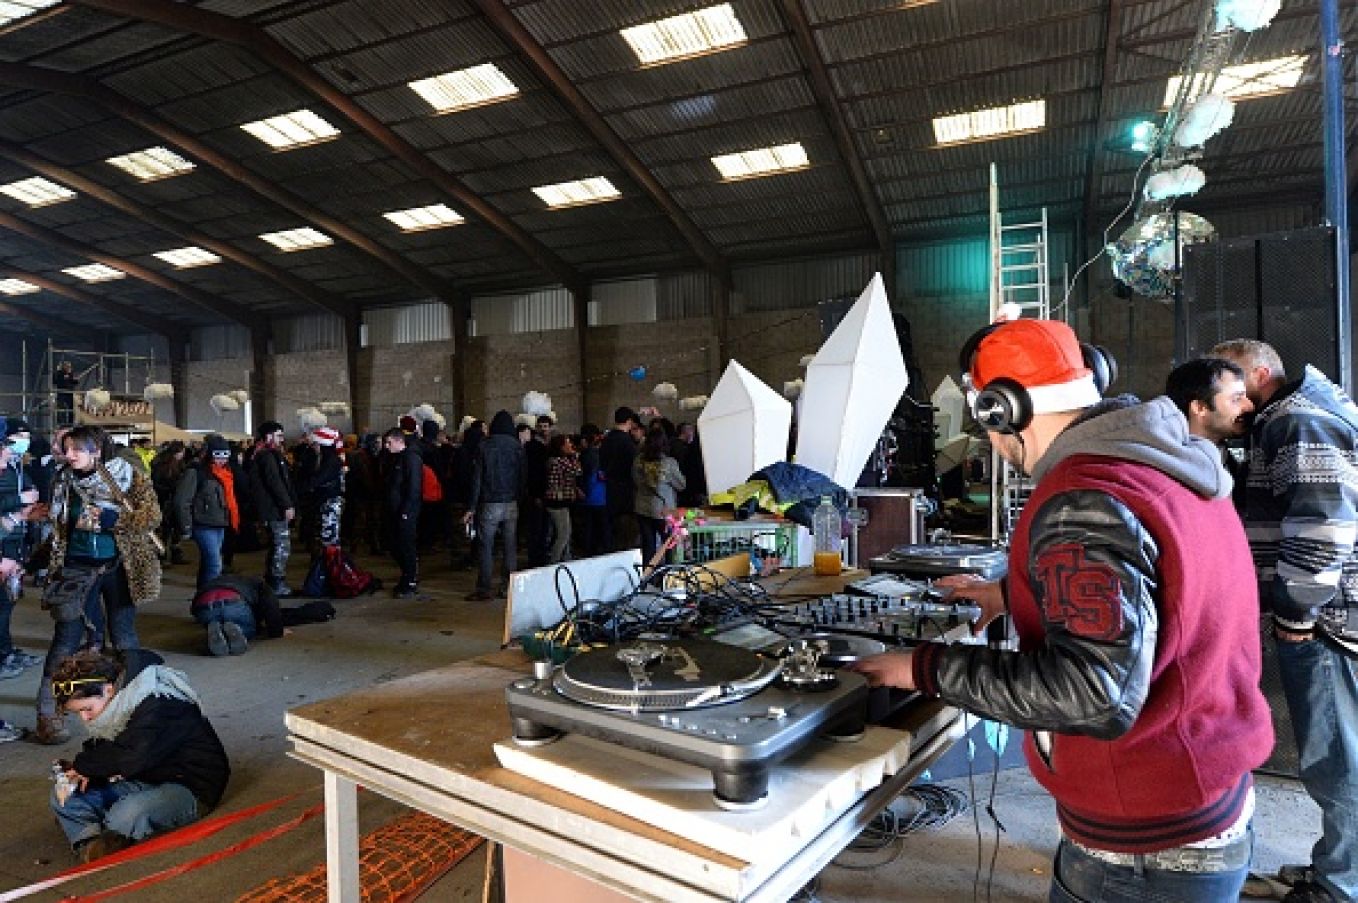 A Dj Plays Music During The Party. Photo: Jean-Francois Monier/Afp Via Getty Images